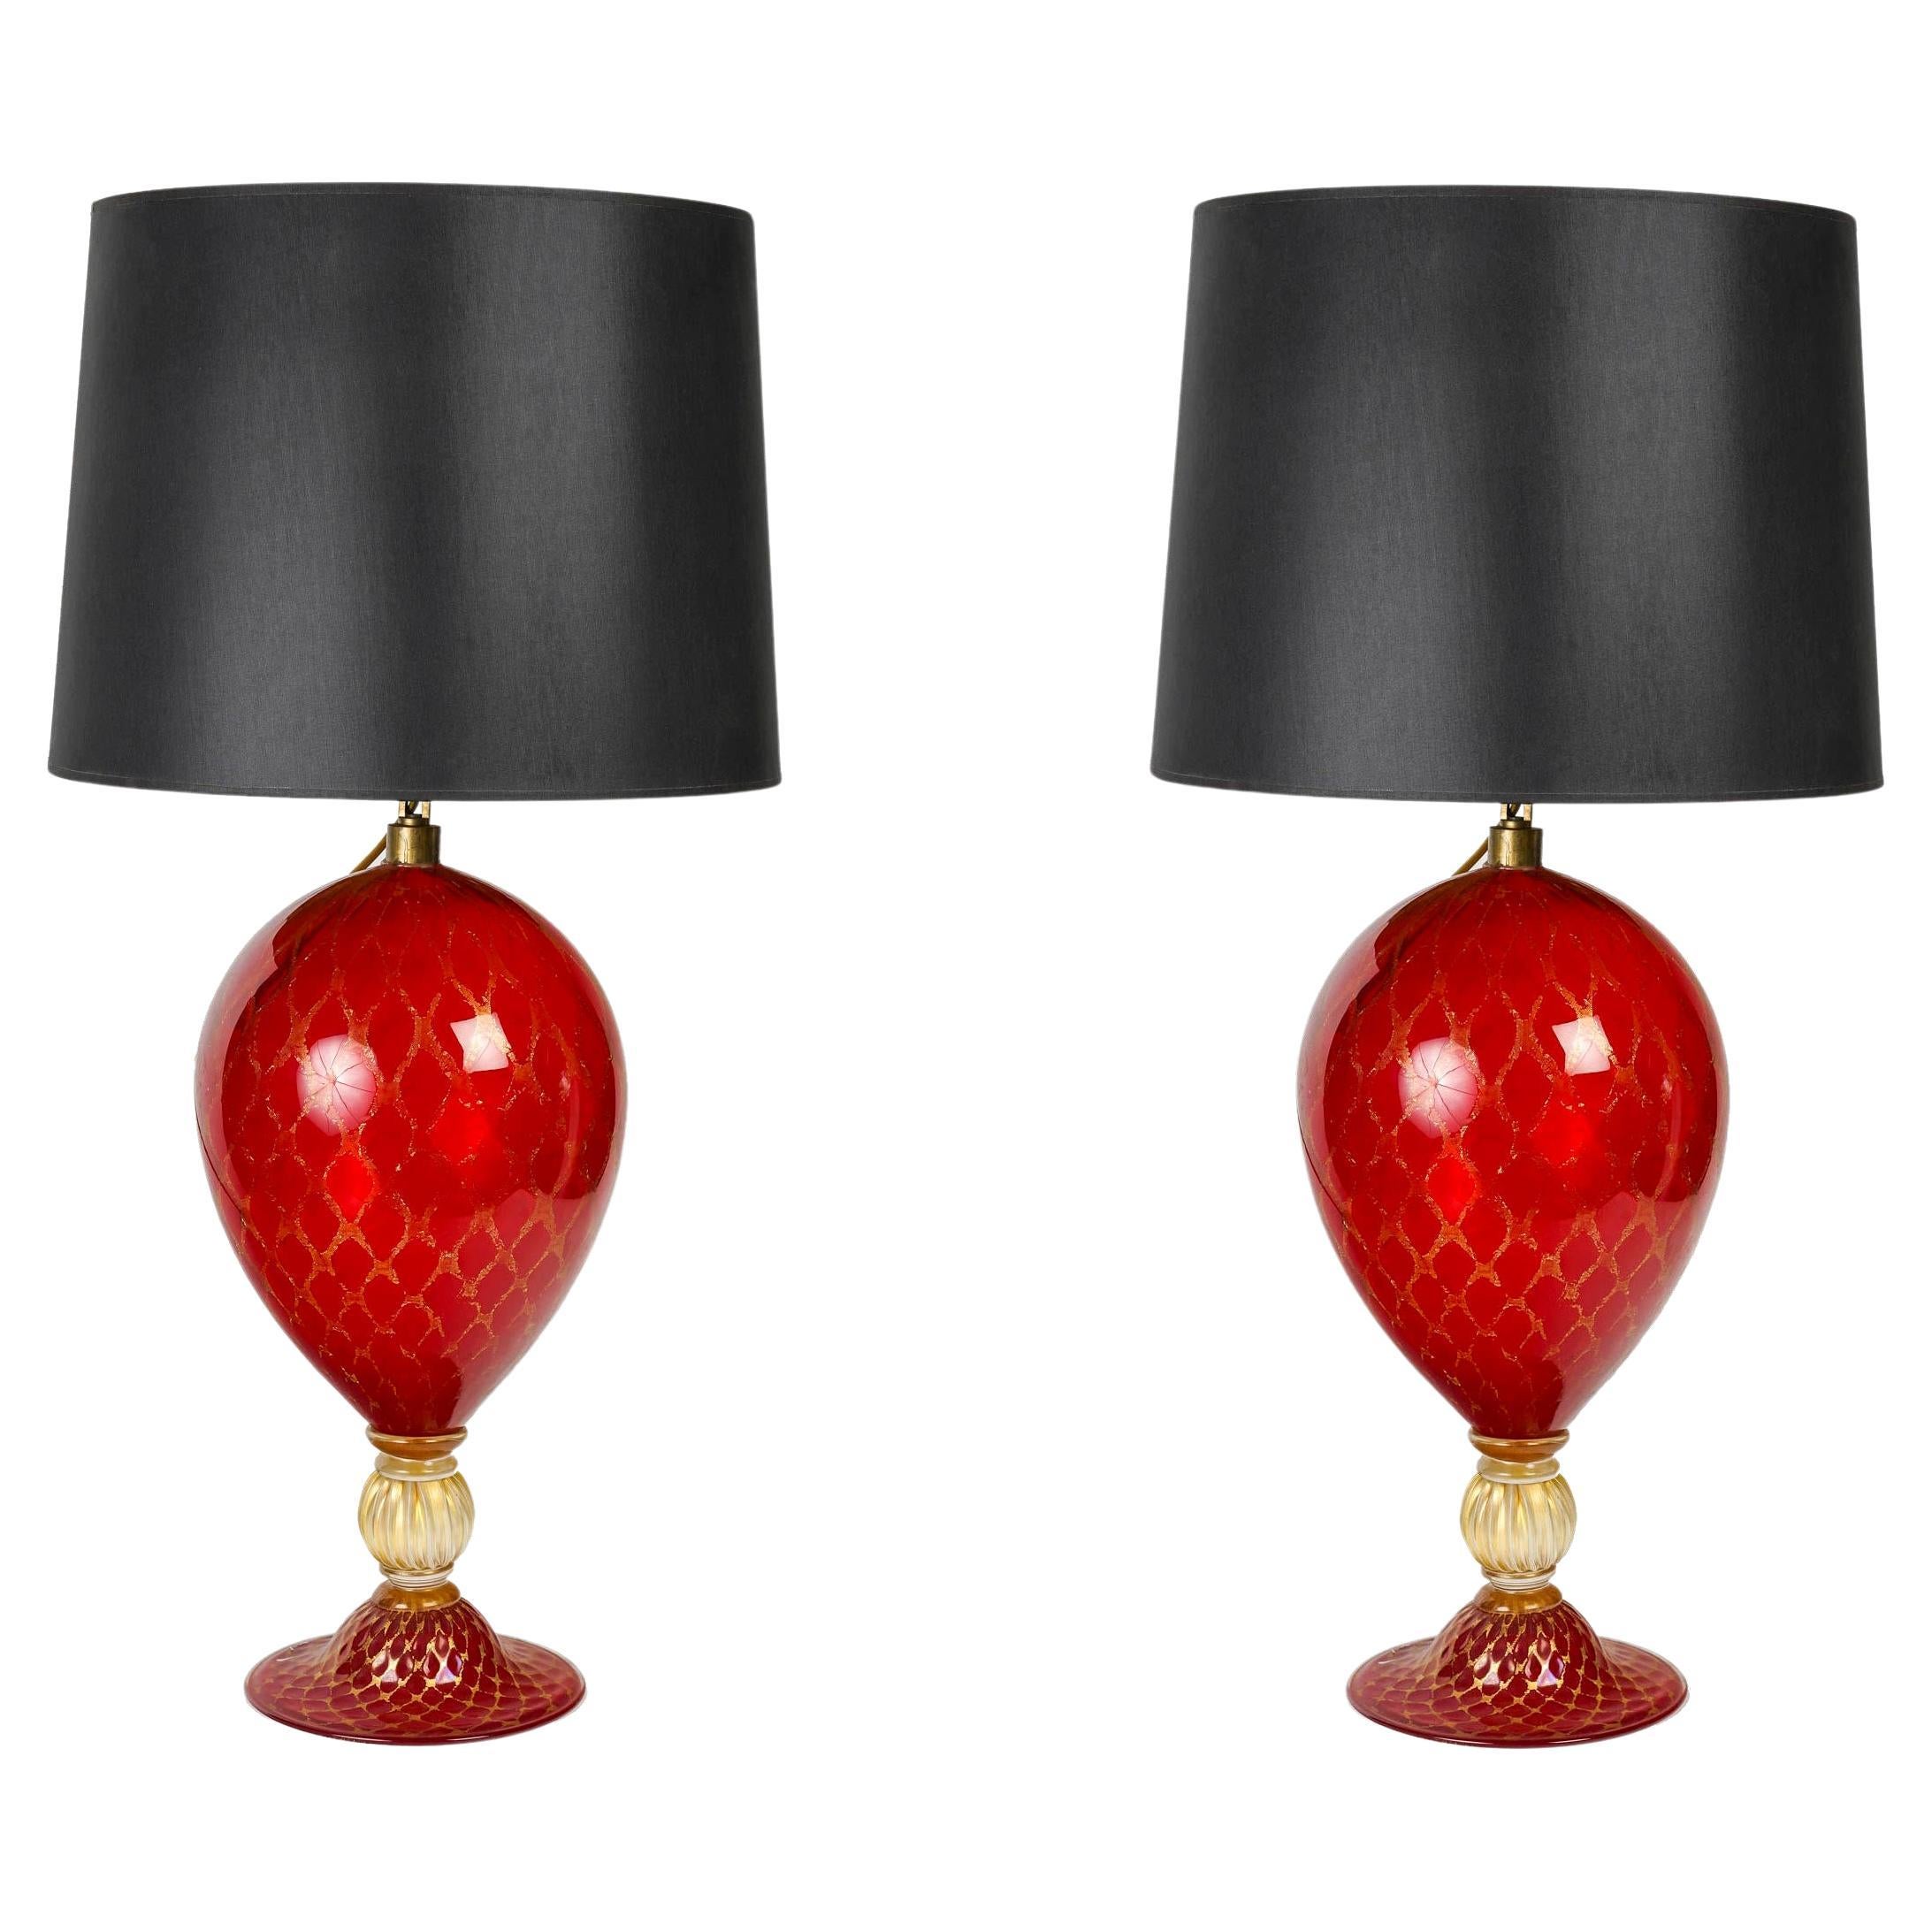 Pair of Murano Glass Table Lamps, Circa 1950.